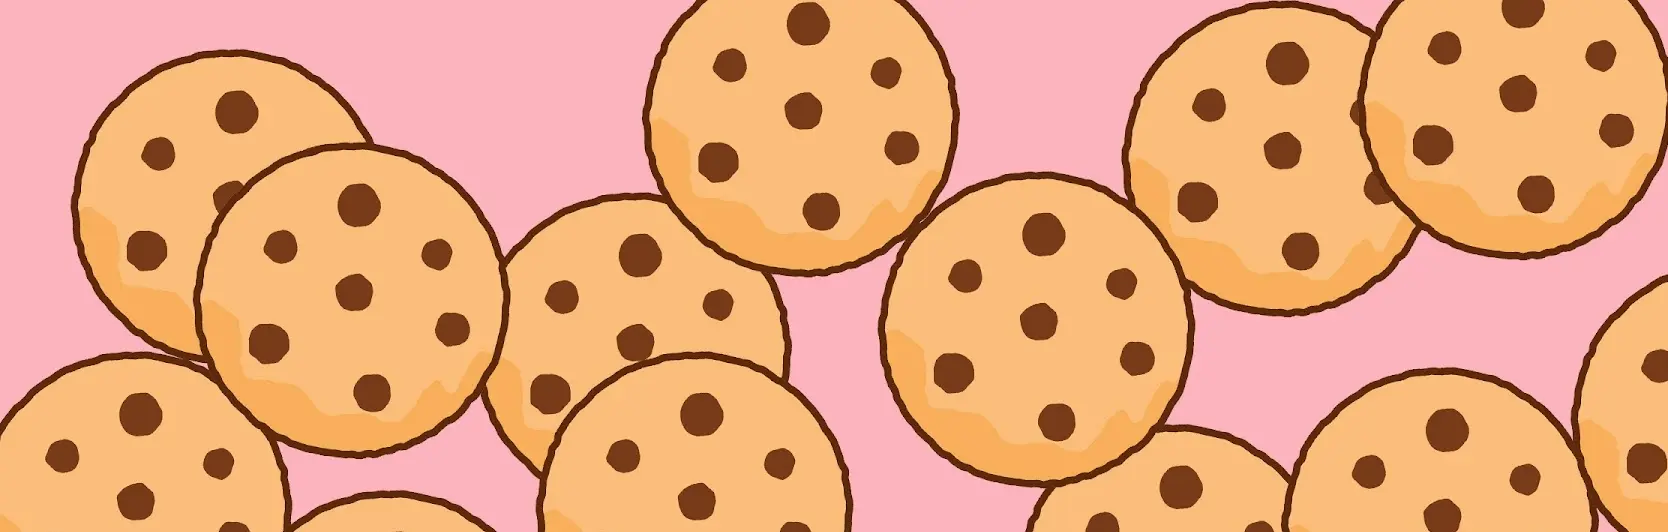 cookie-banner 532px x 1668px